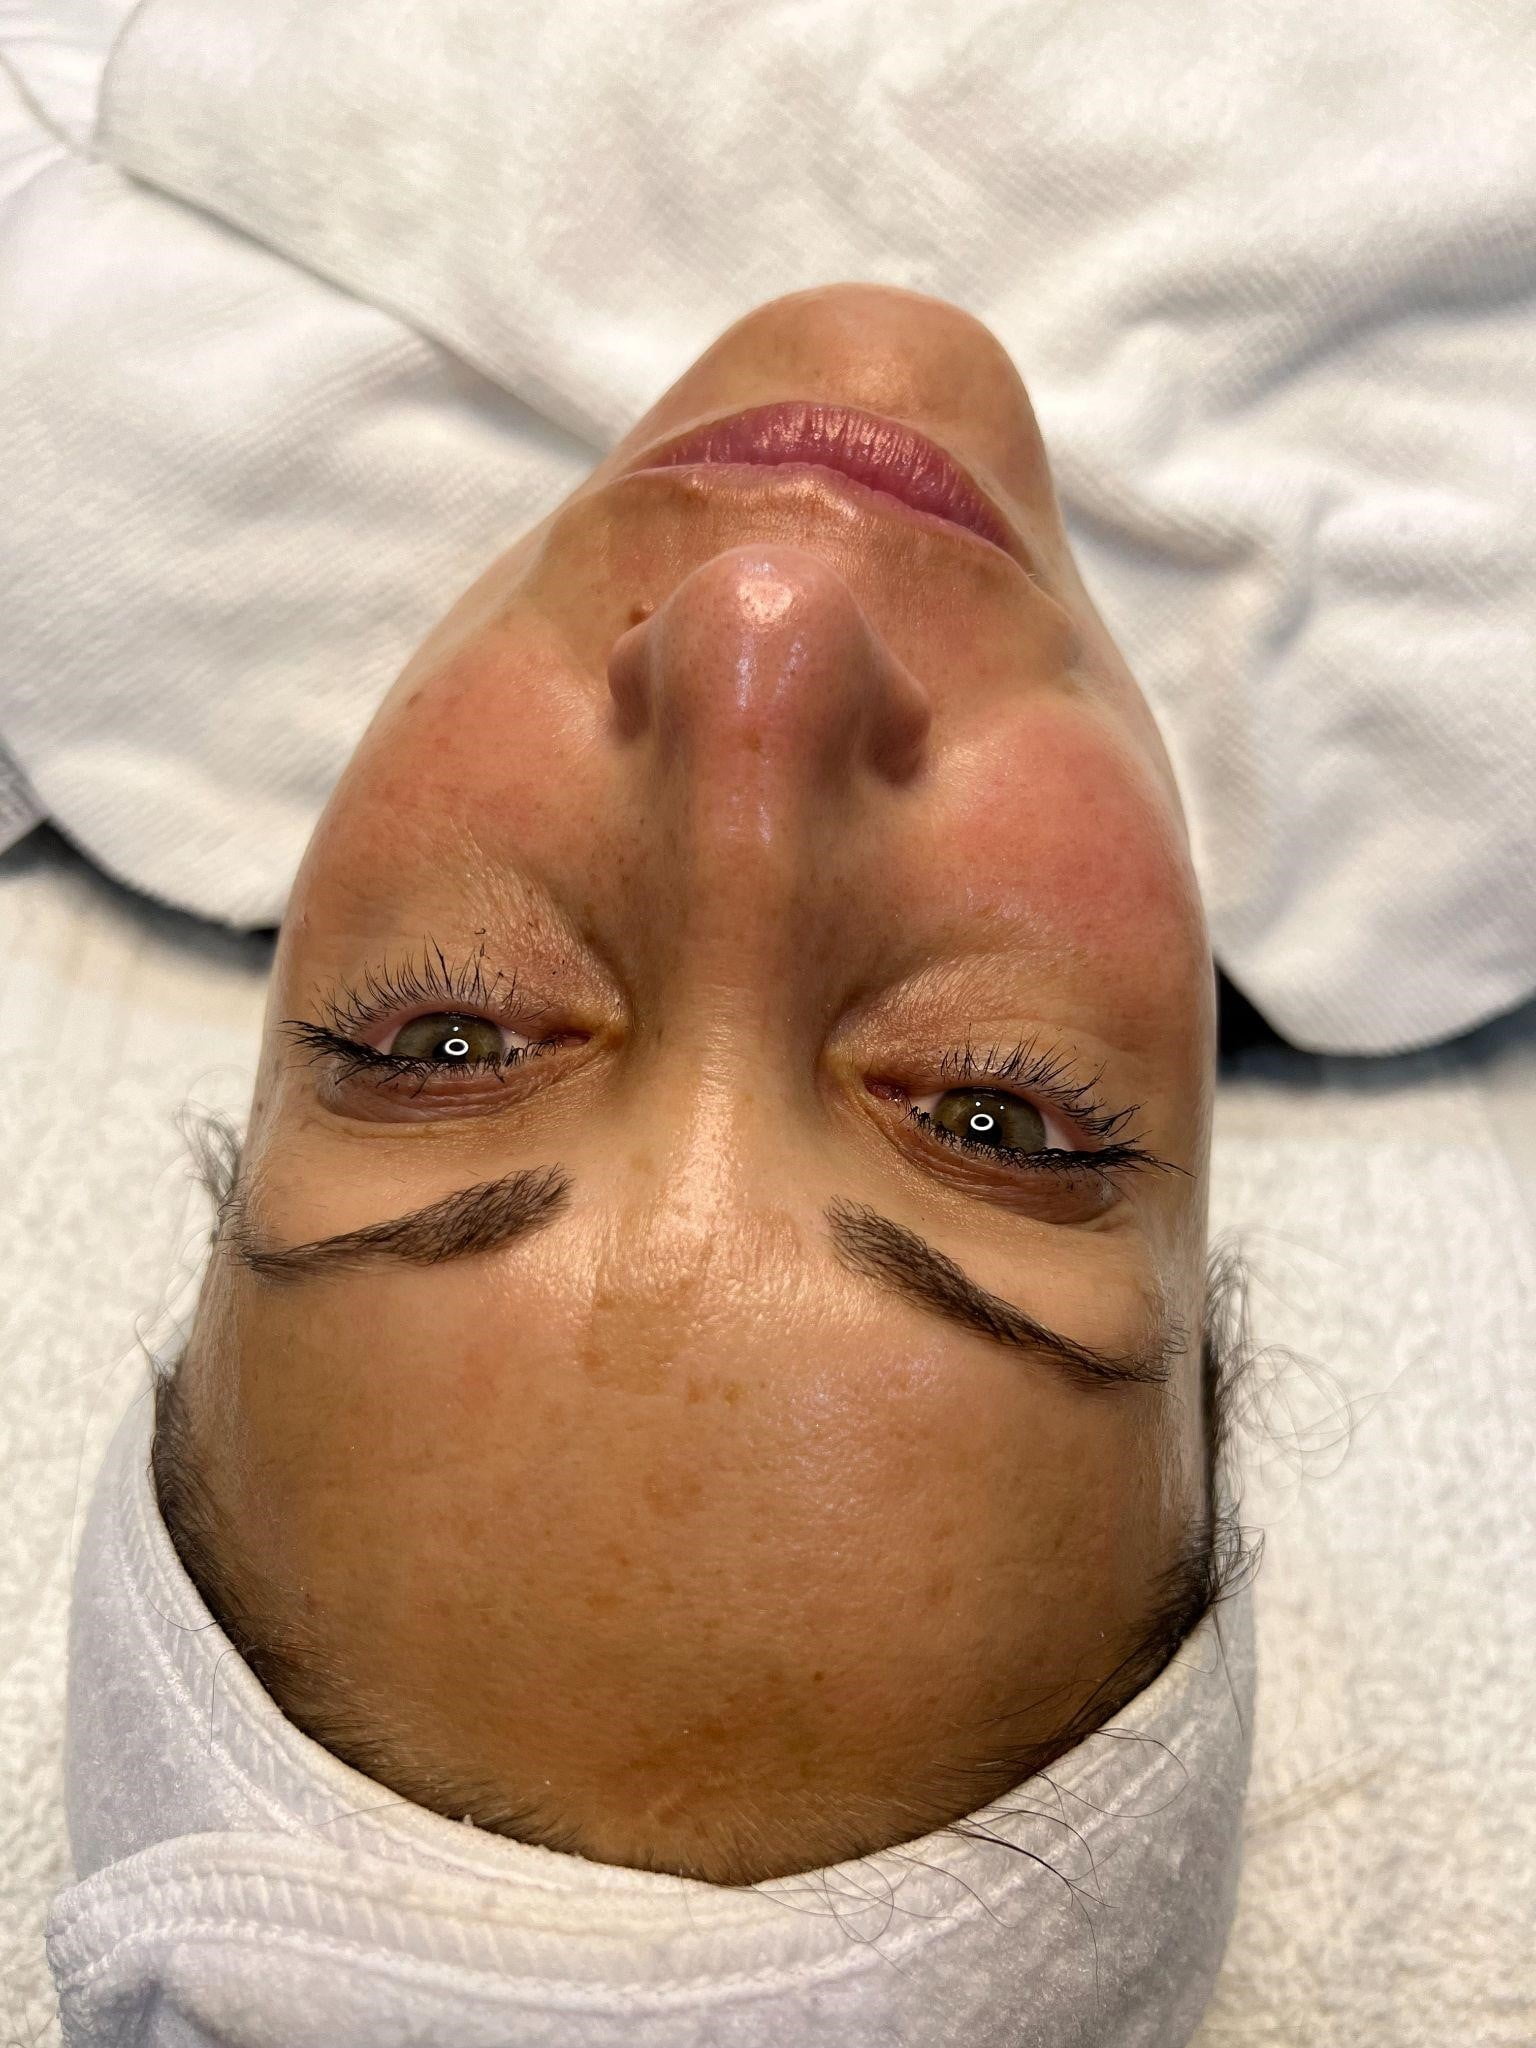 A Women's face after Chemical peels | Cultivated Beauty Aesthetic in Guntersville, AL